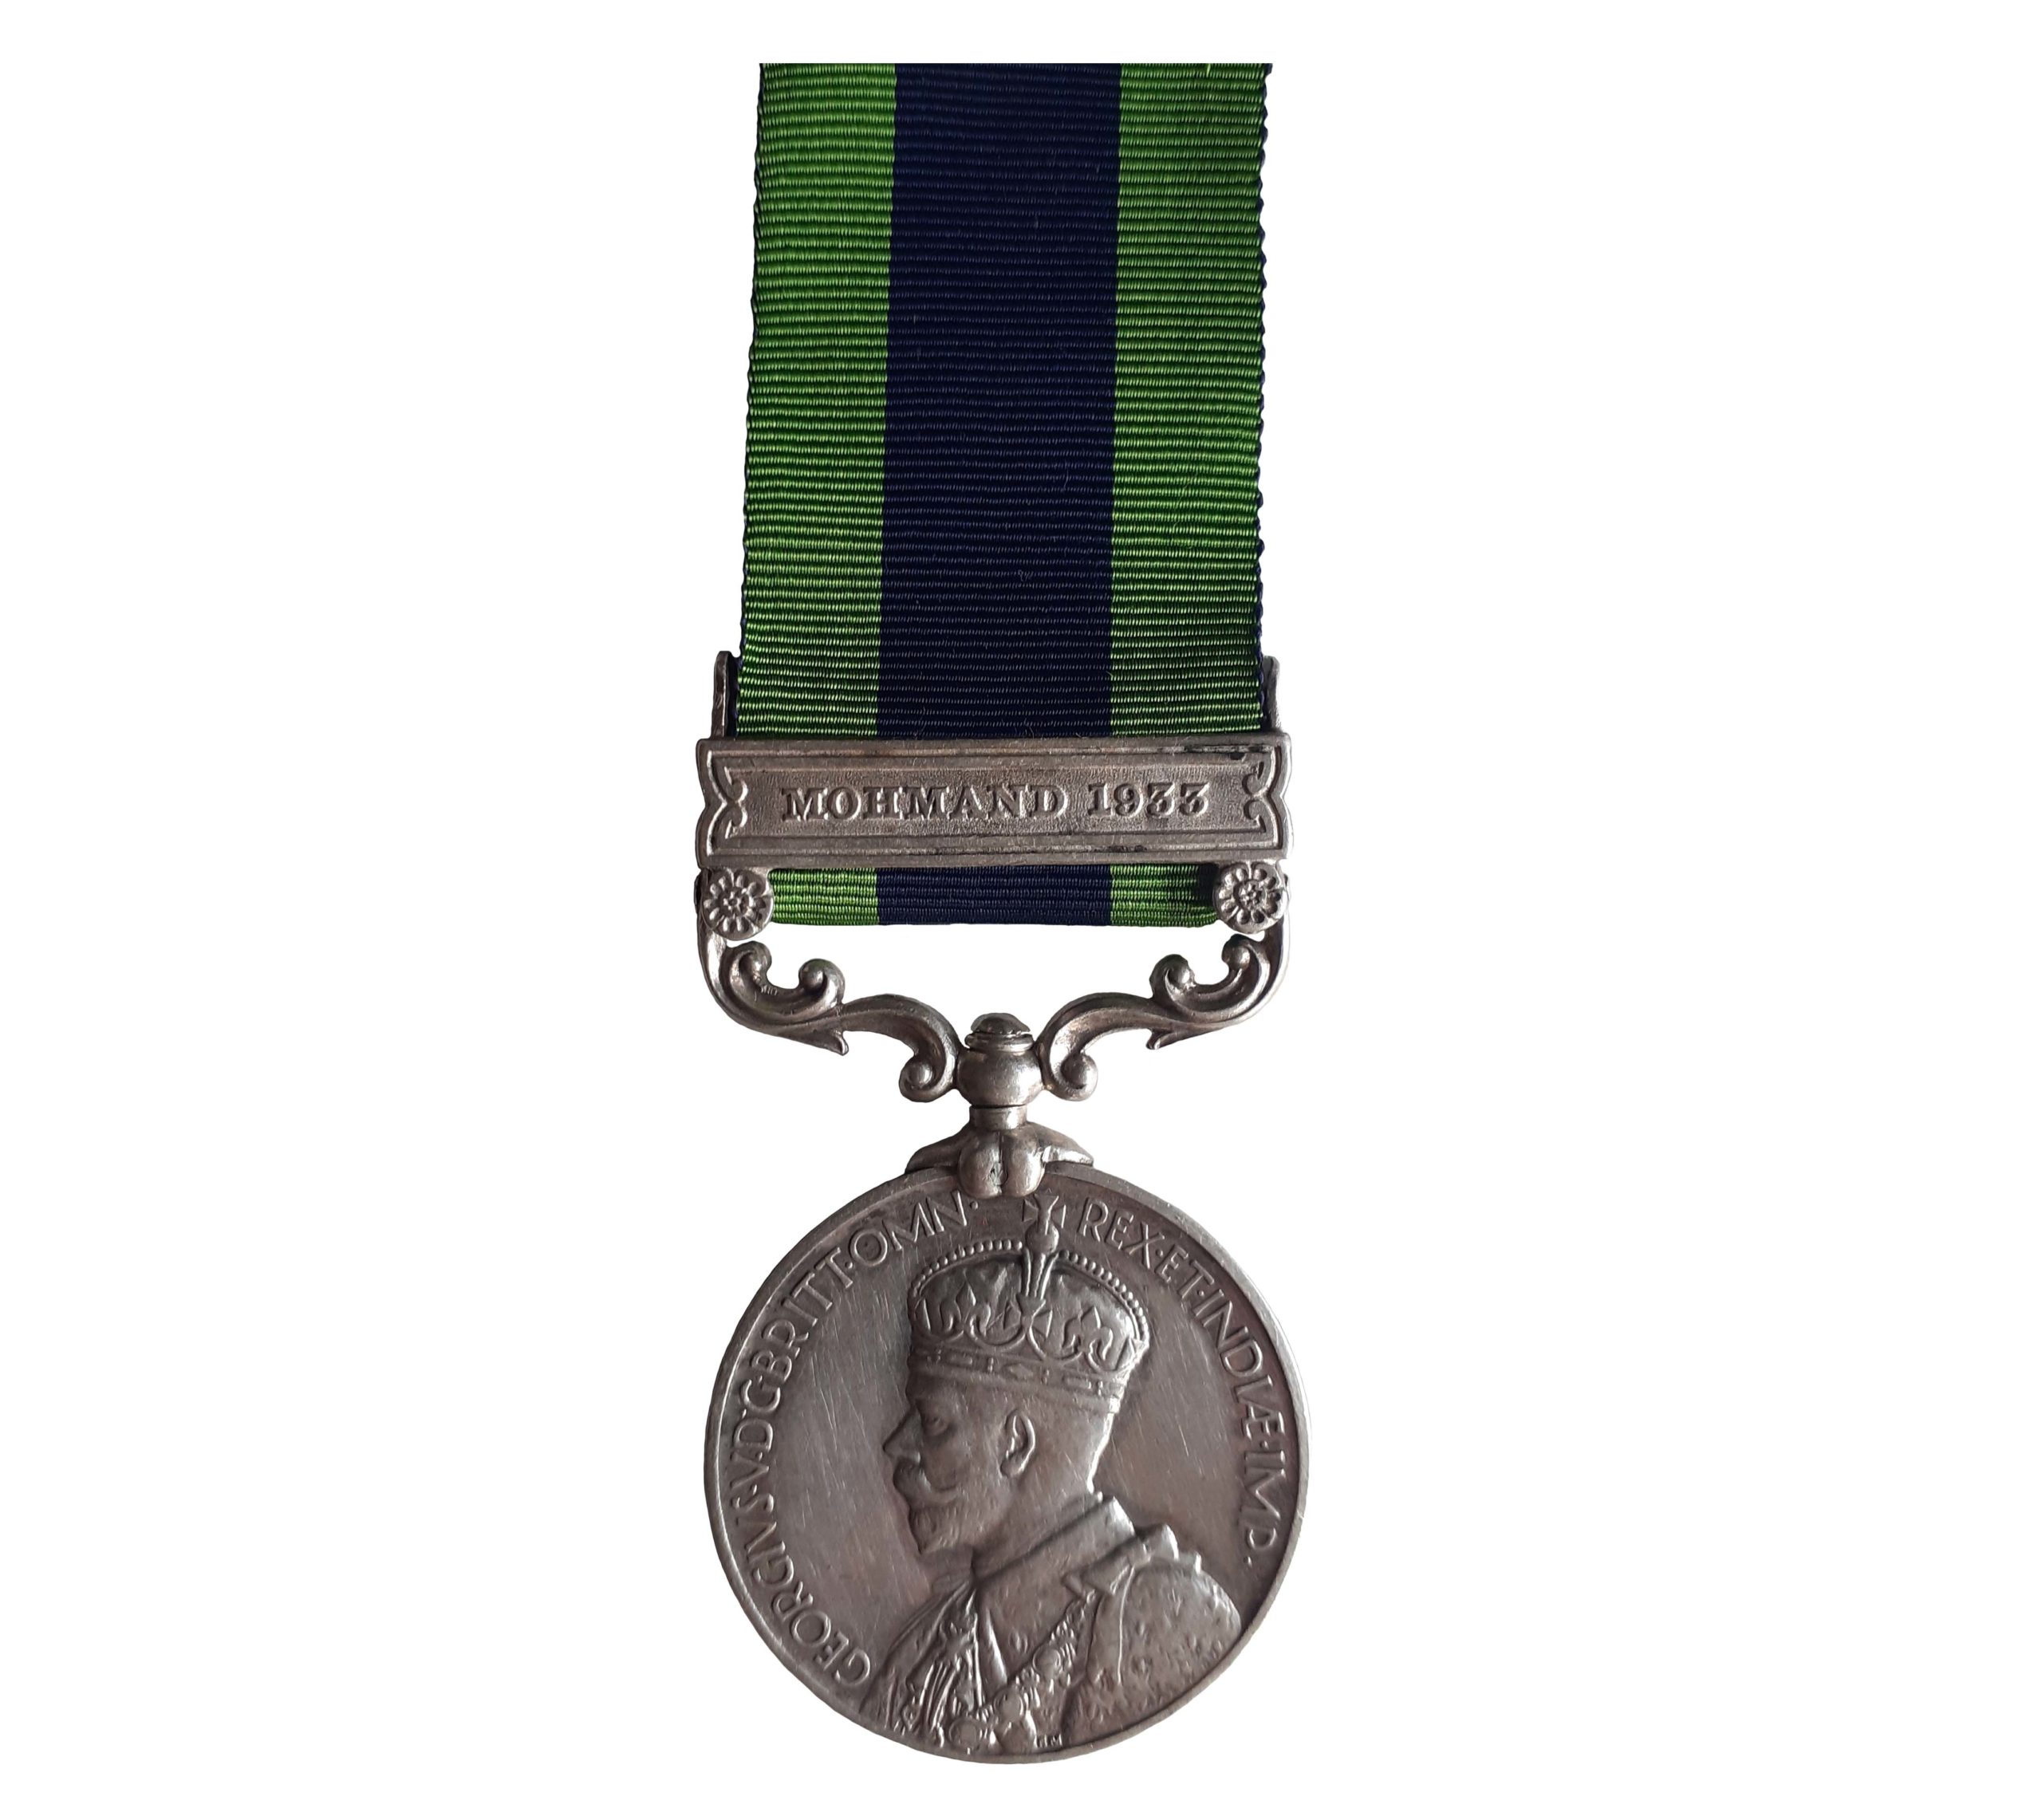 India General Service Medal 1908-35, one clasp, Mohmand 1933, to Bearer Haider